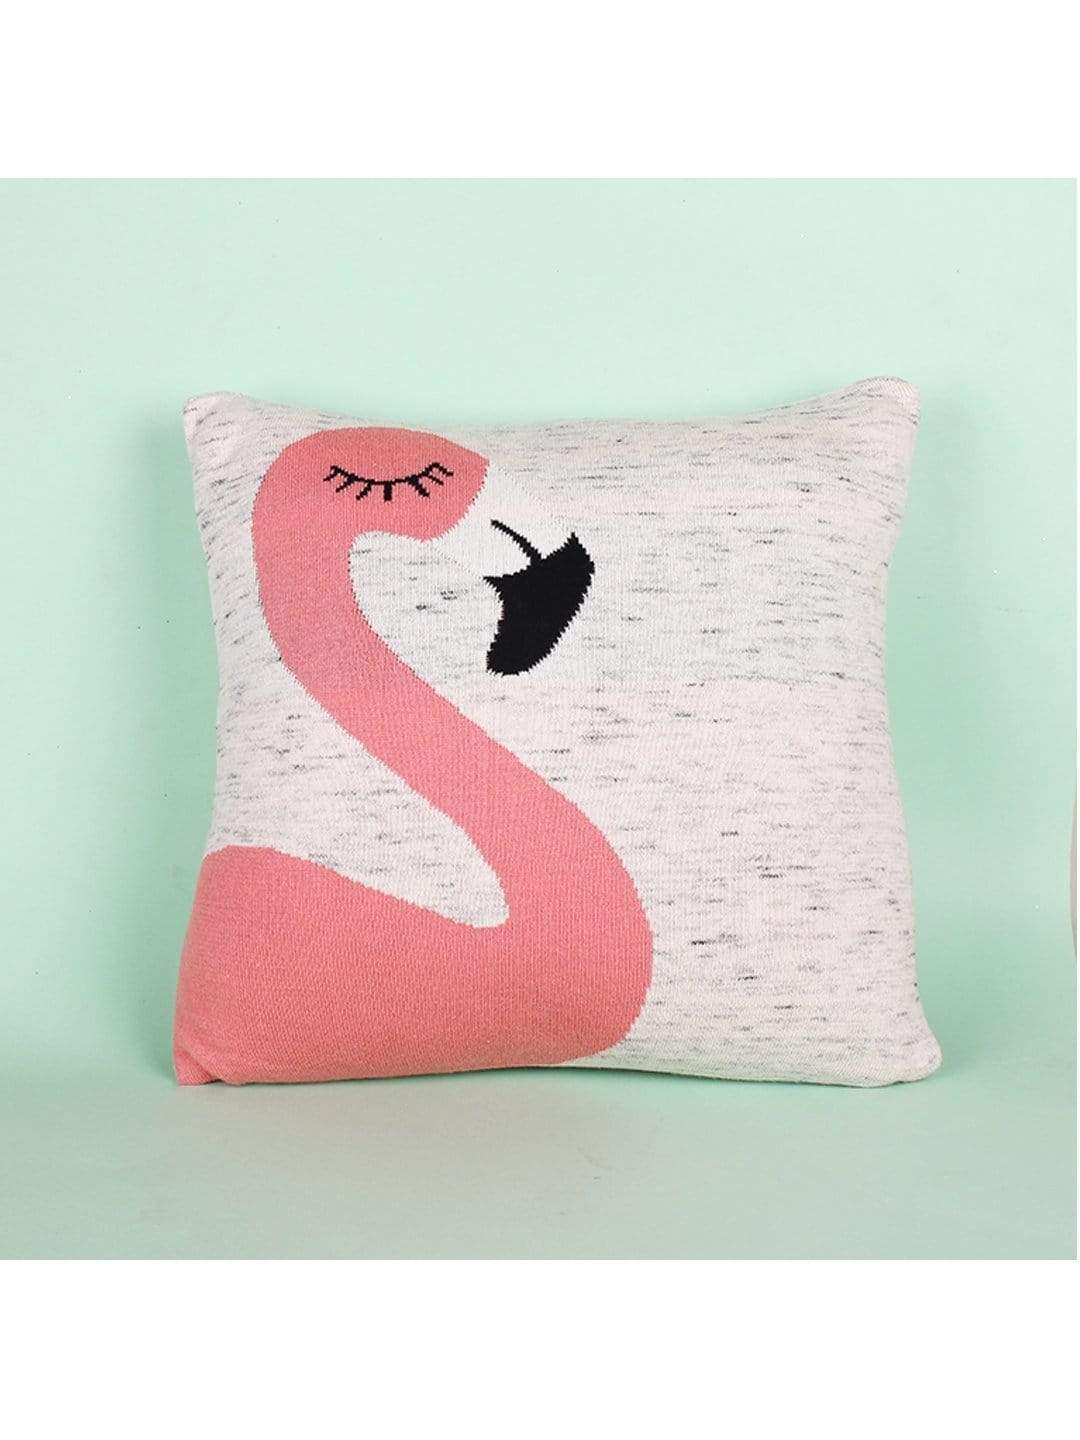 Flamingo Knitted Cotton Cushion Cover - The Wishing Chair